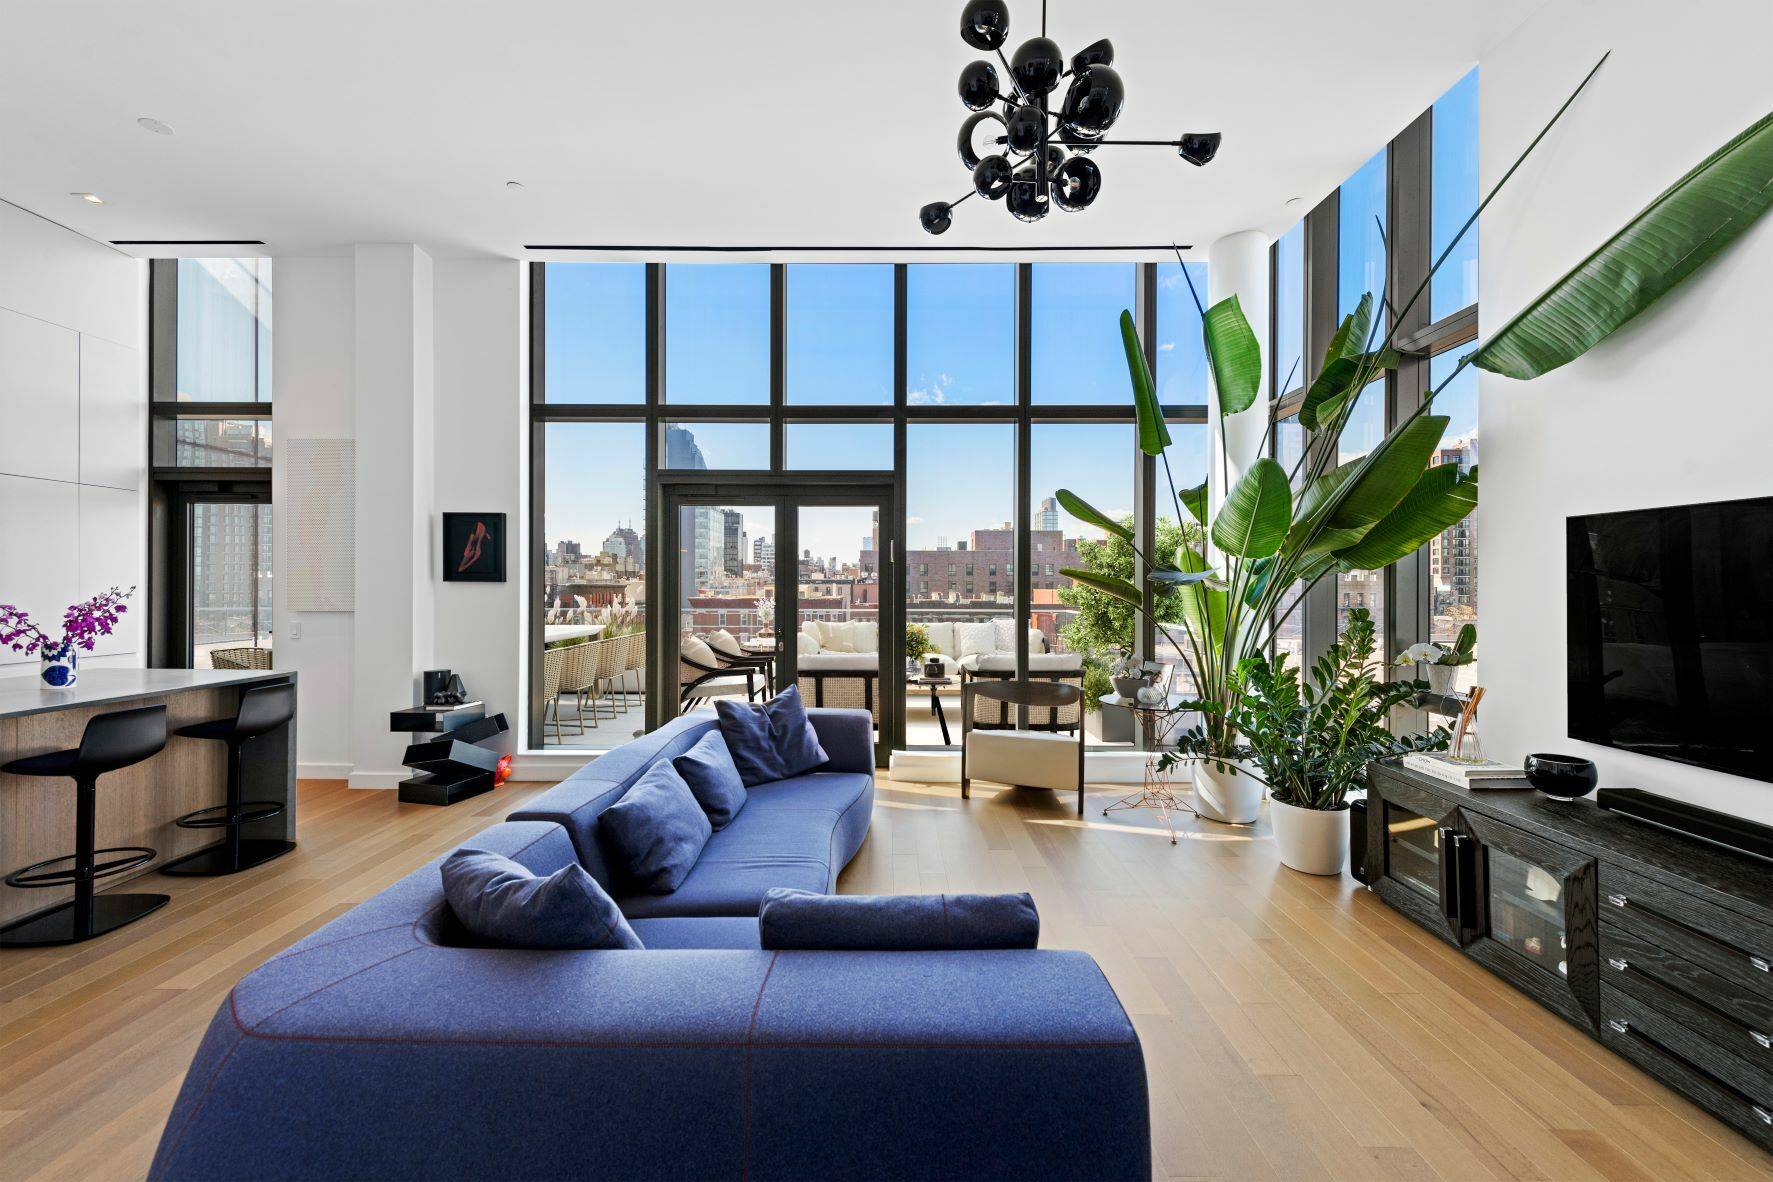 Modern craftsmanship and high end luxury come together in this stunning corner penthouse in the heart of the Lower East Side, a 3 bedroom, 3 bathroom condo boasting a pair ...